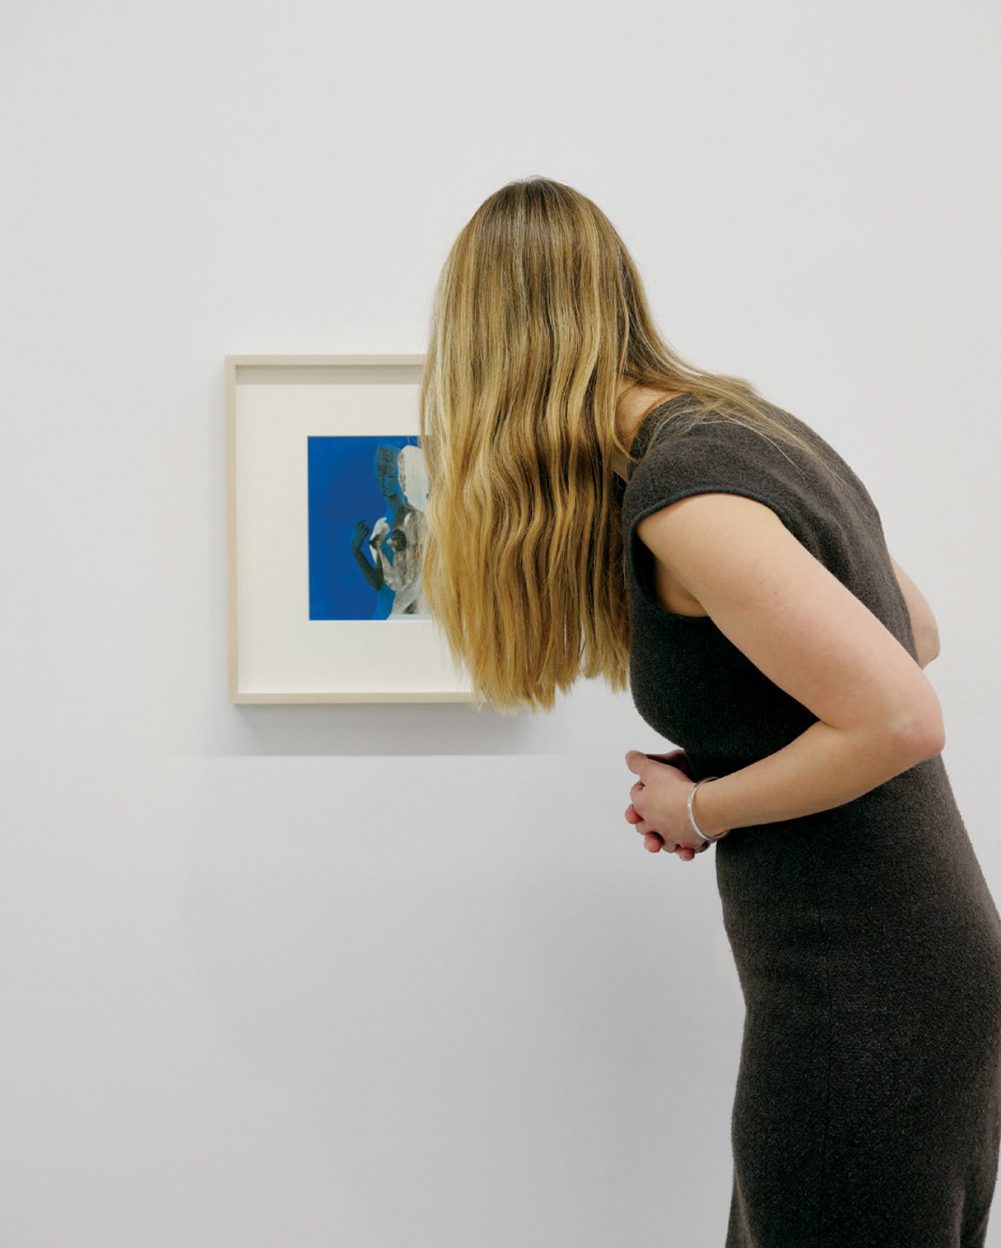 Woman has back turned to camera as she views a framed art painting on white wall.